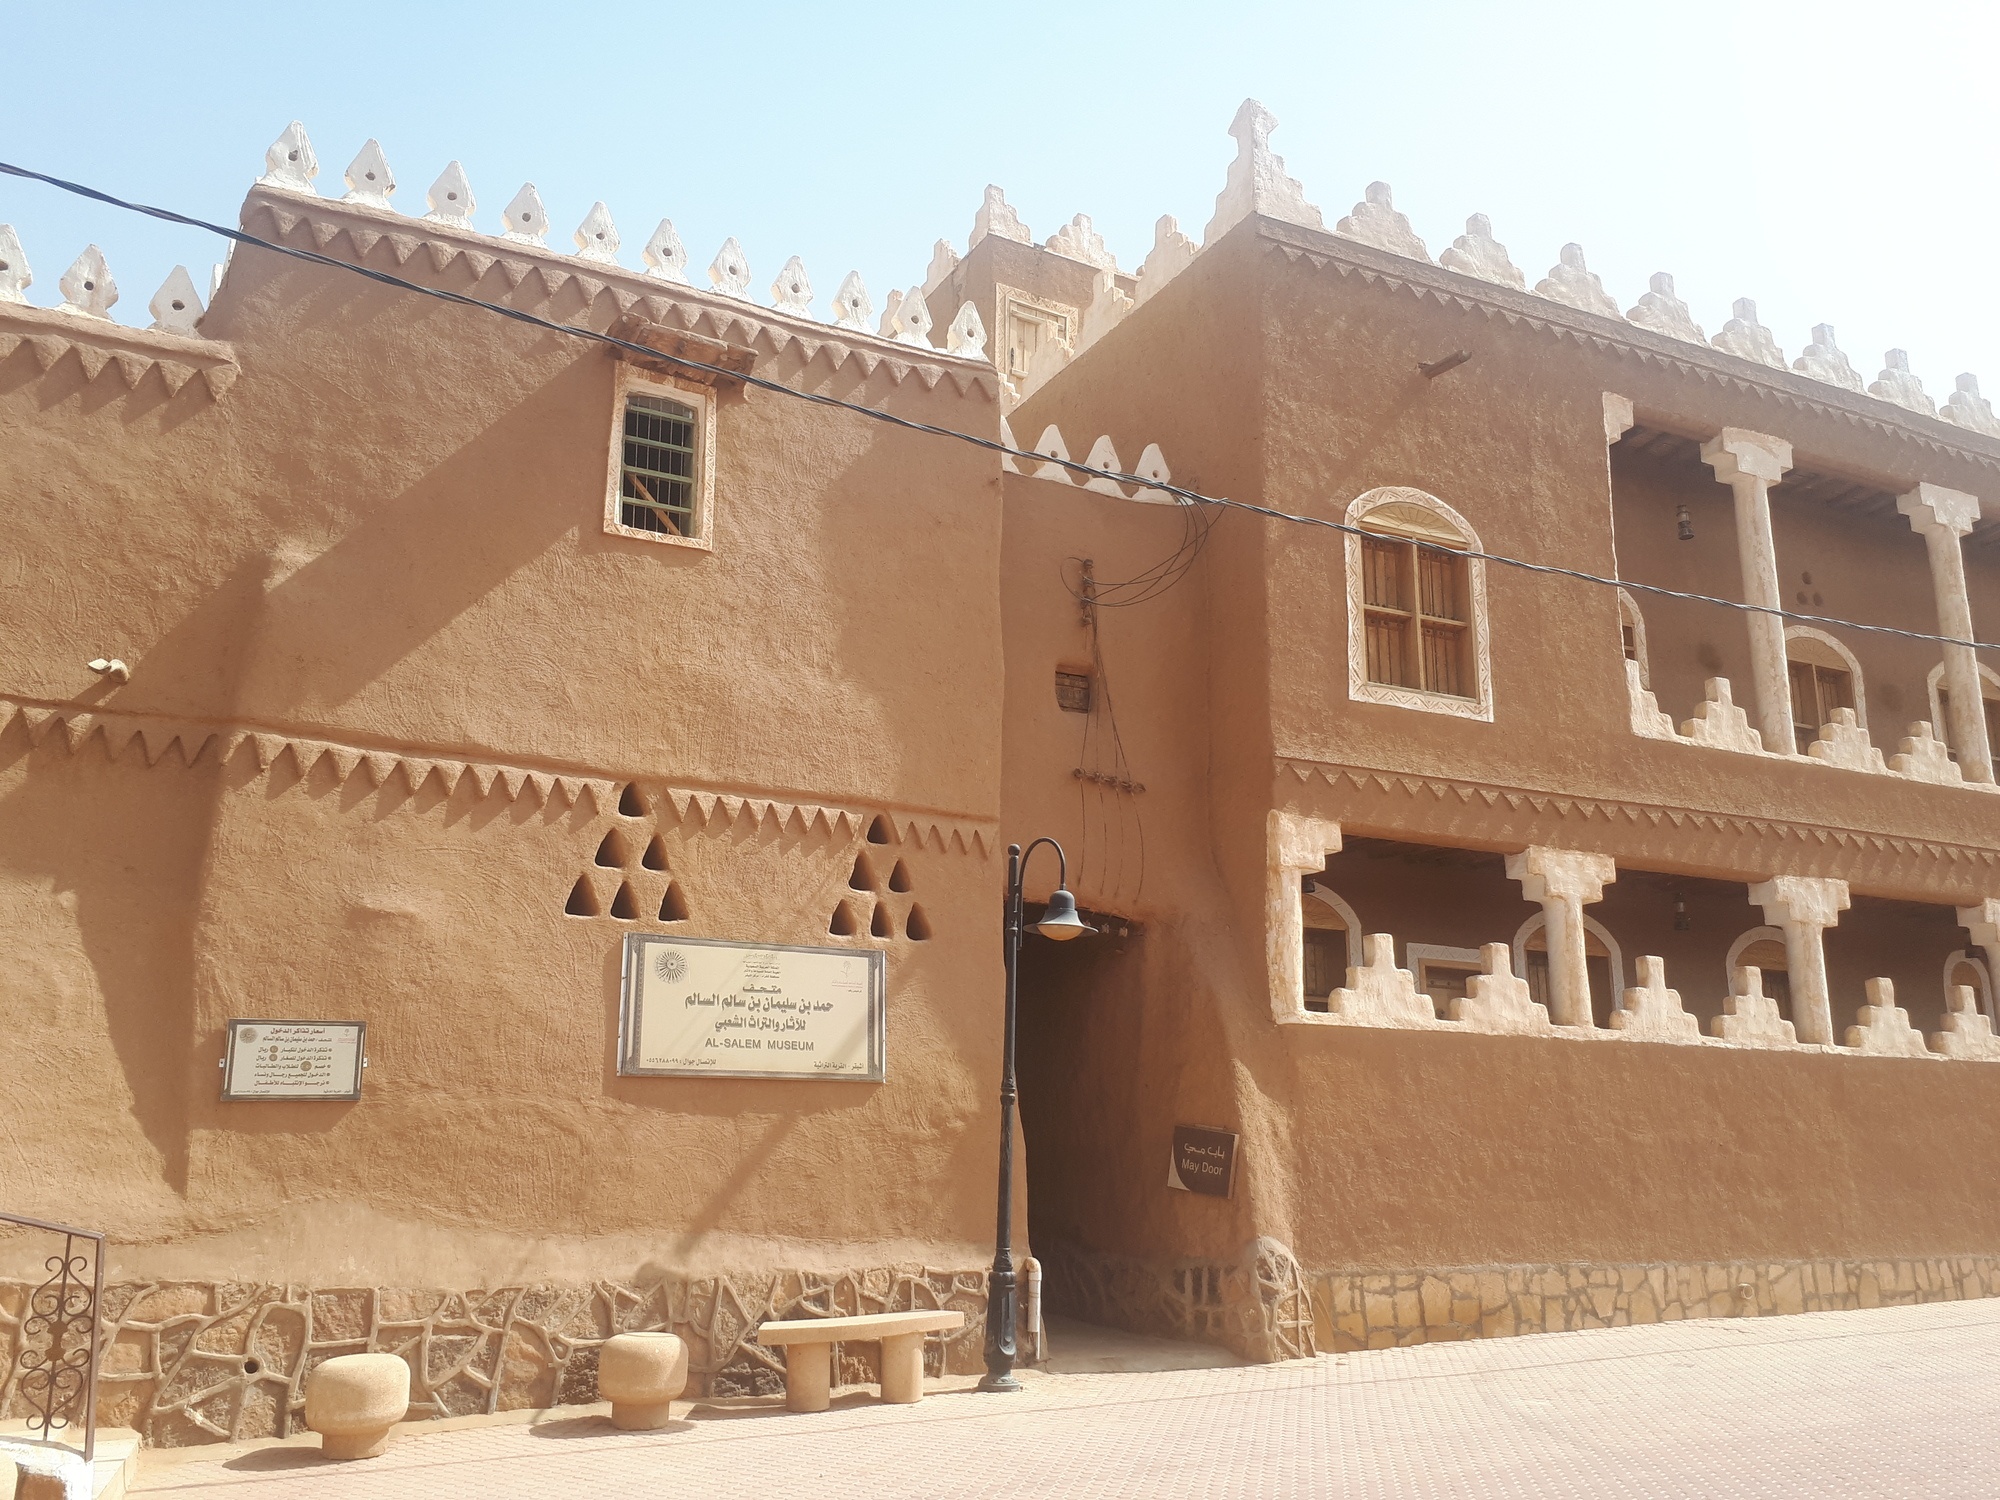 Backpacking in Saudi Arabia: Touring Ushaiqer Town, Basically a Museum in a Guy's House! - Don't Stop Living